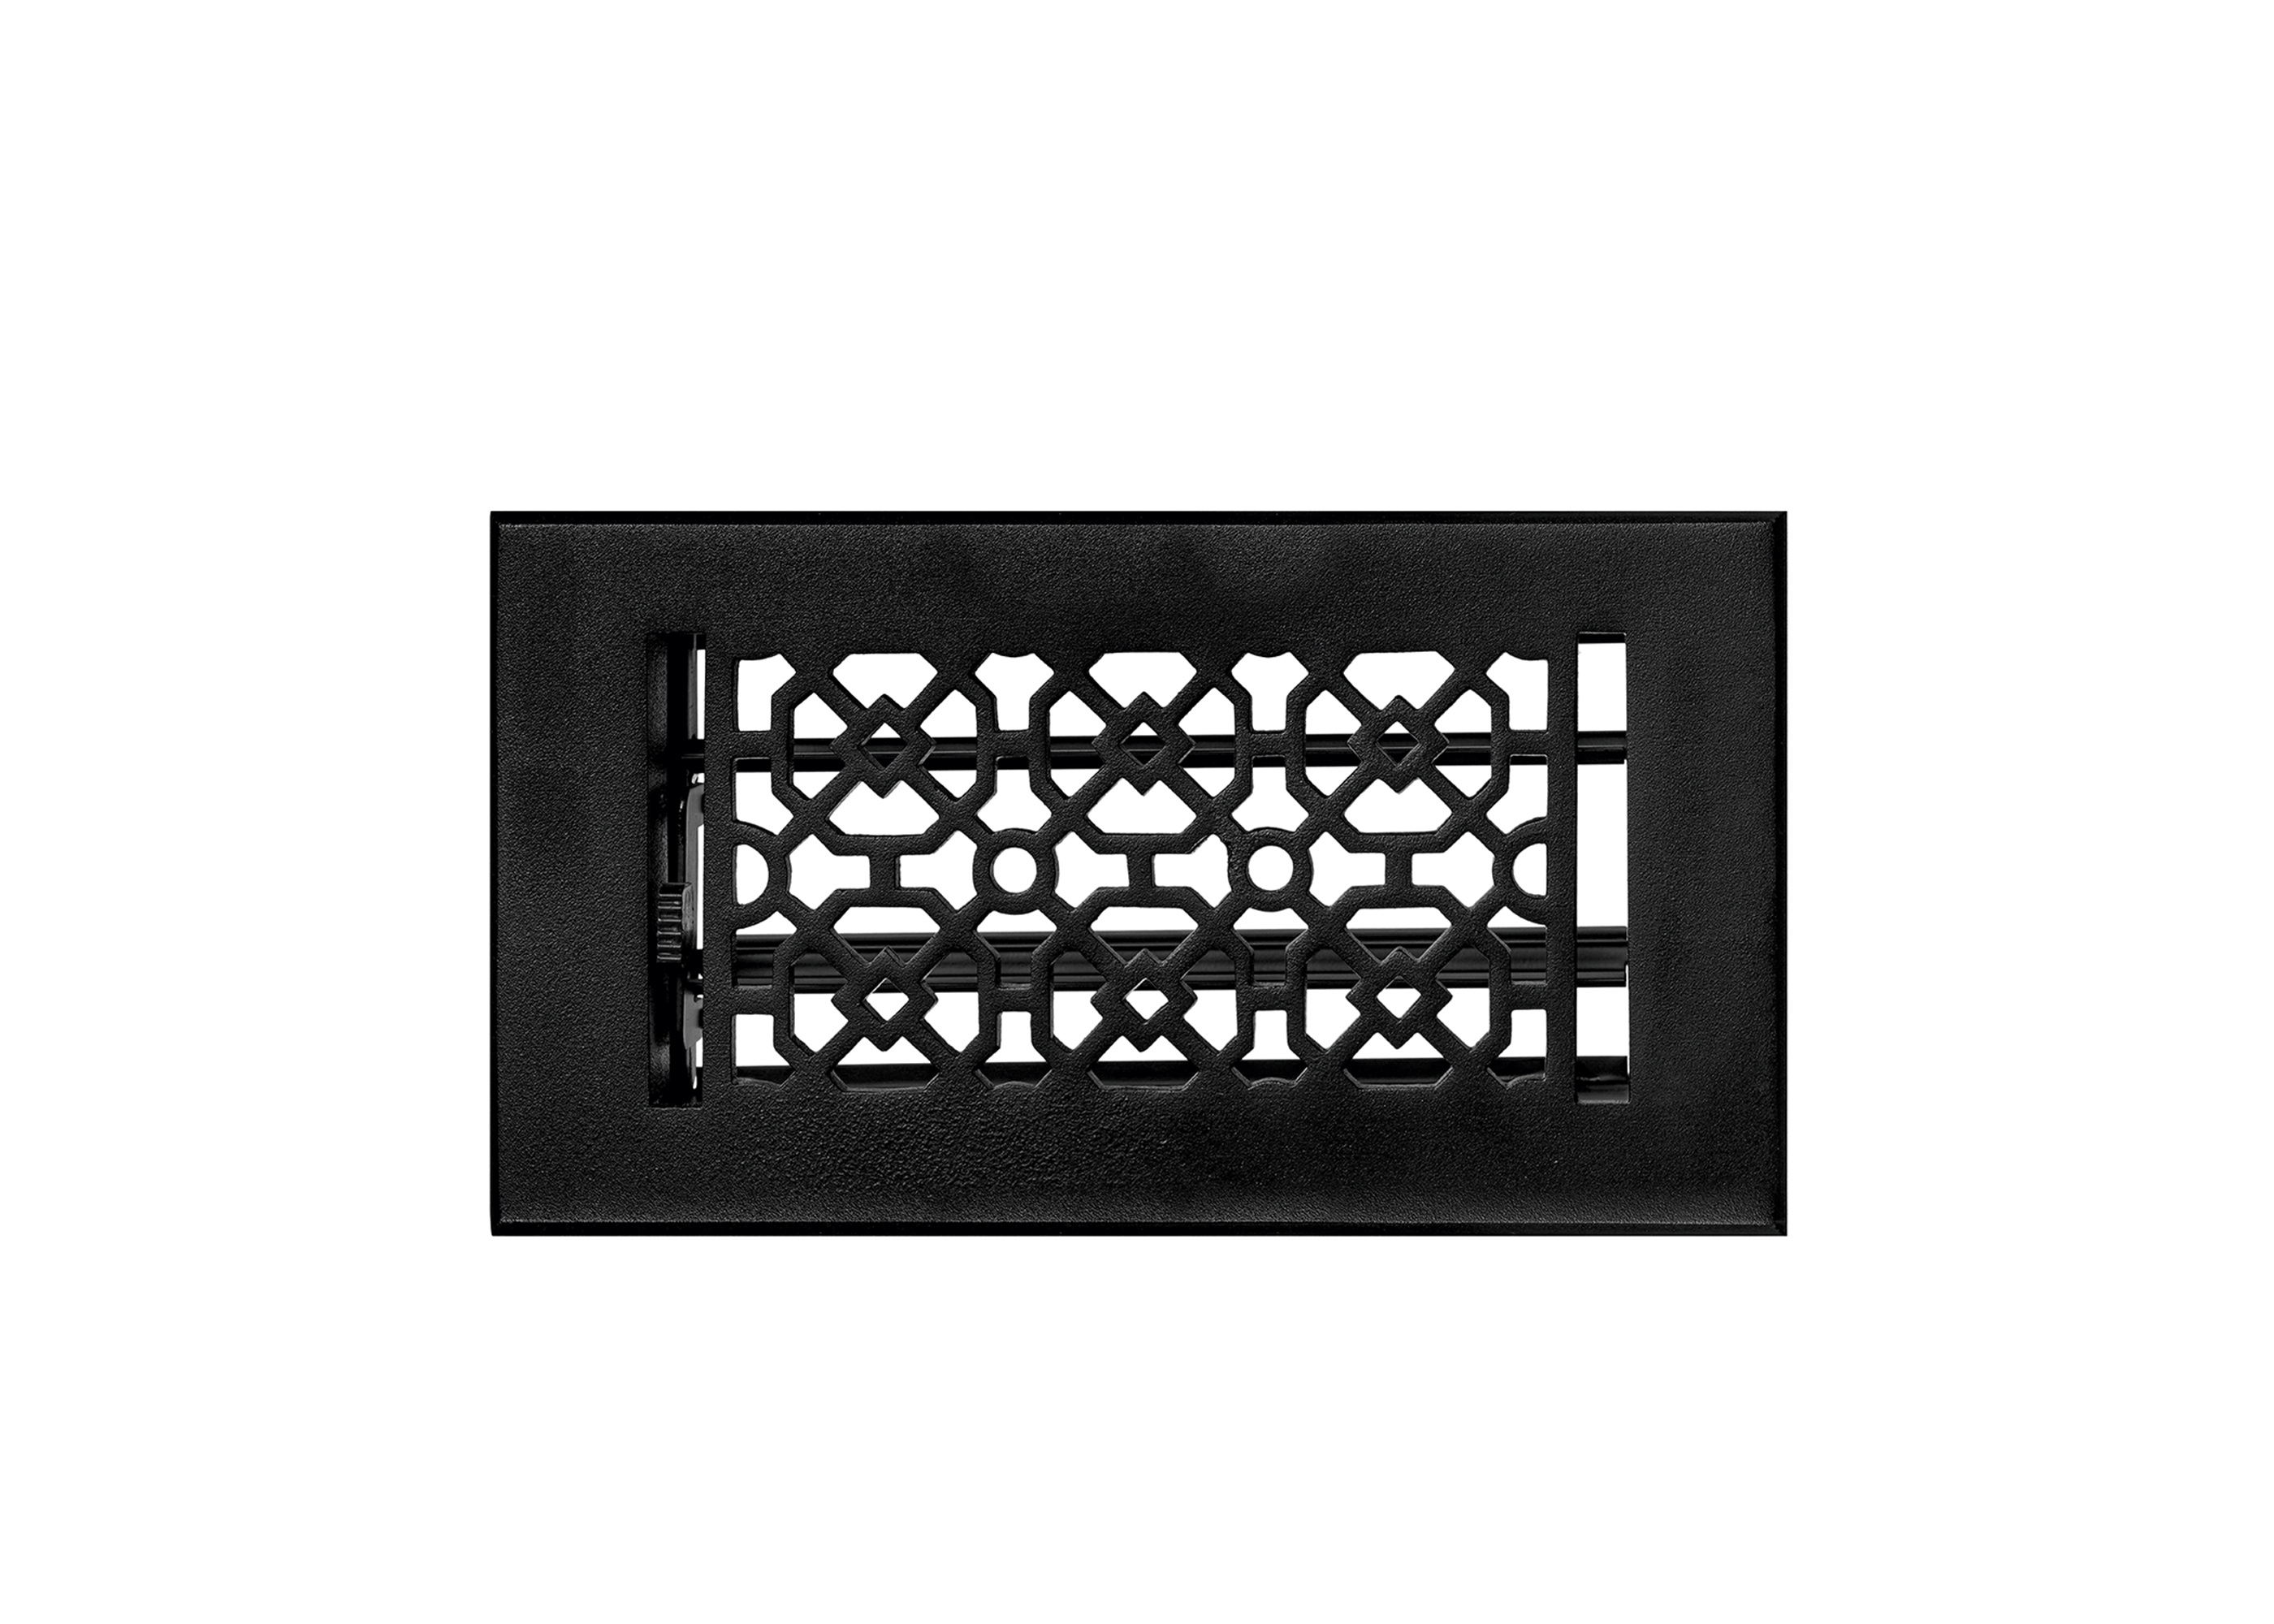 Achtek Air Supply Vent 4"x 8" Duct Opening (Overall 5-1/2"x 9-1/2") Solid Cast Aluminium Register Cover | Powder Coated